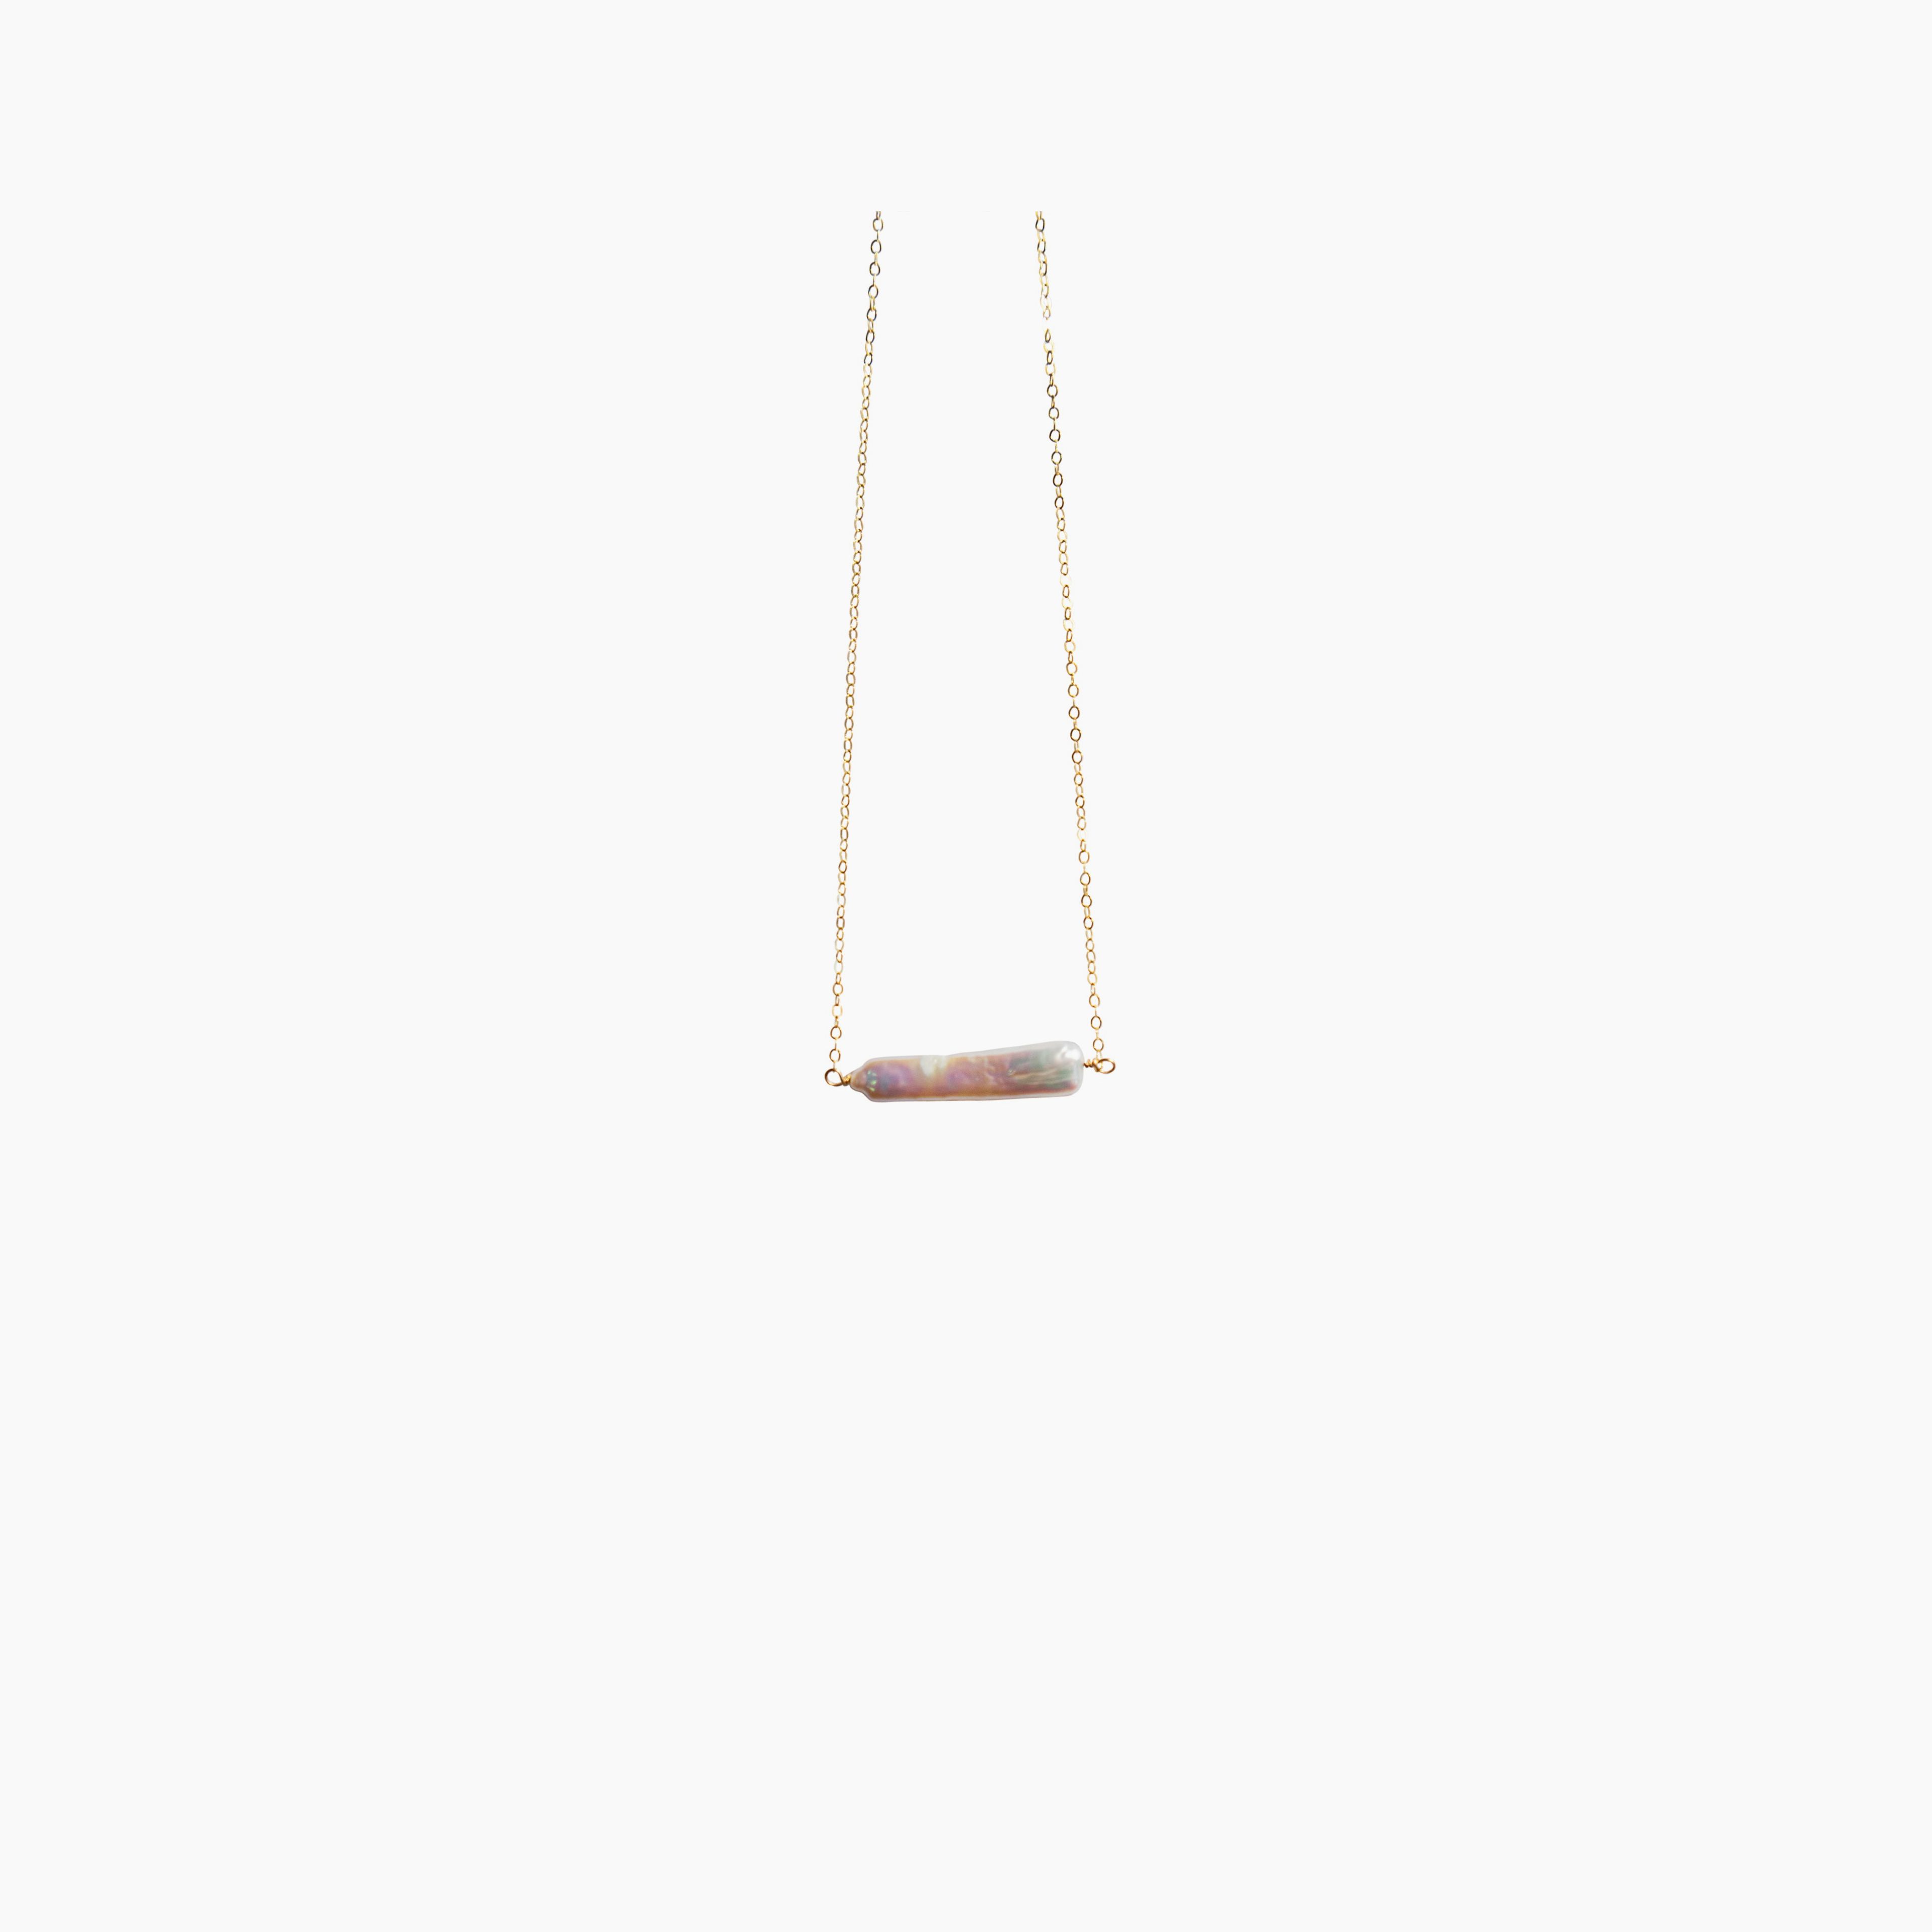 Ayla — Freshwater pearl necklace